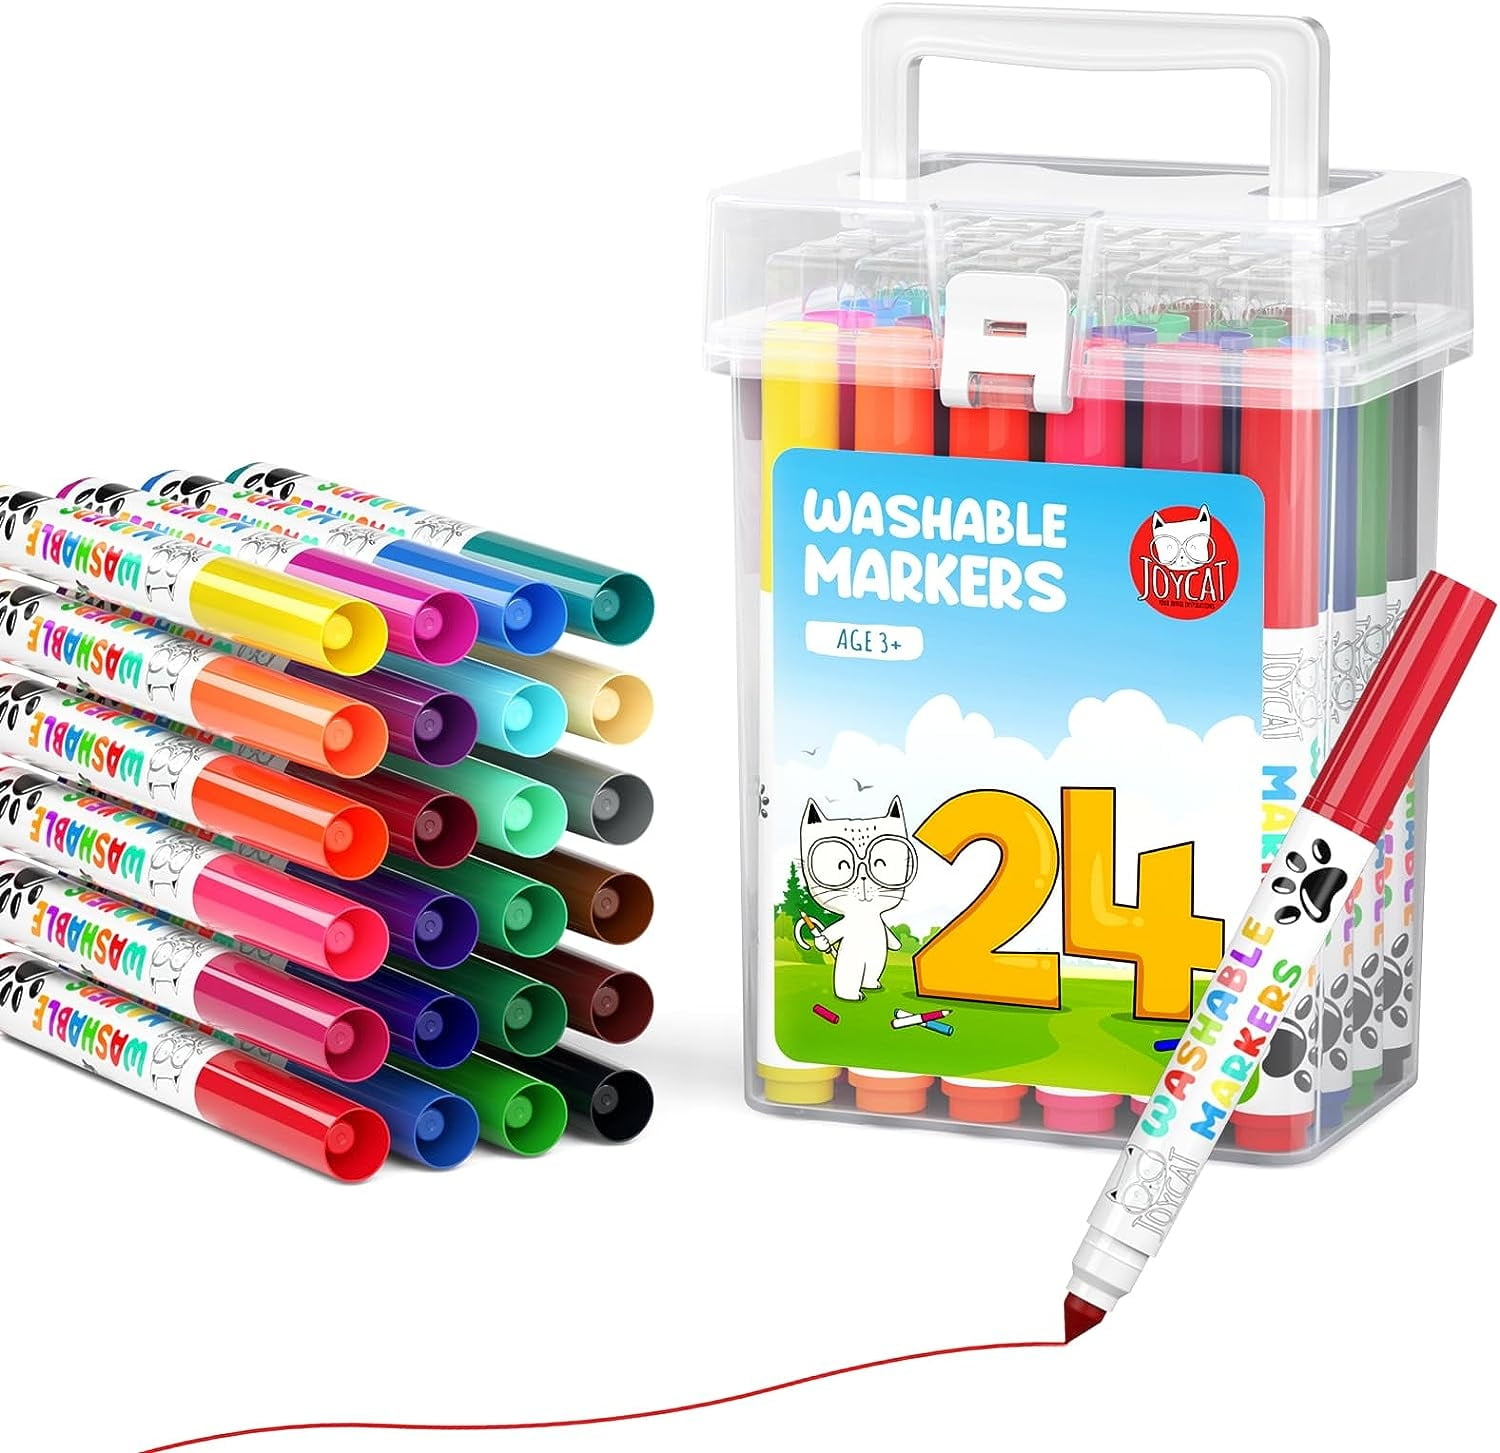 JoyCat 24 Count Washable Markers for Kids,24 Colors Washable Markers Set with Carrying and Storage Case,Coloring Marker Bulk for Boys Girls,School